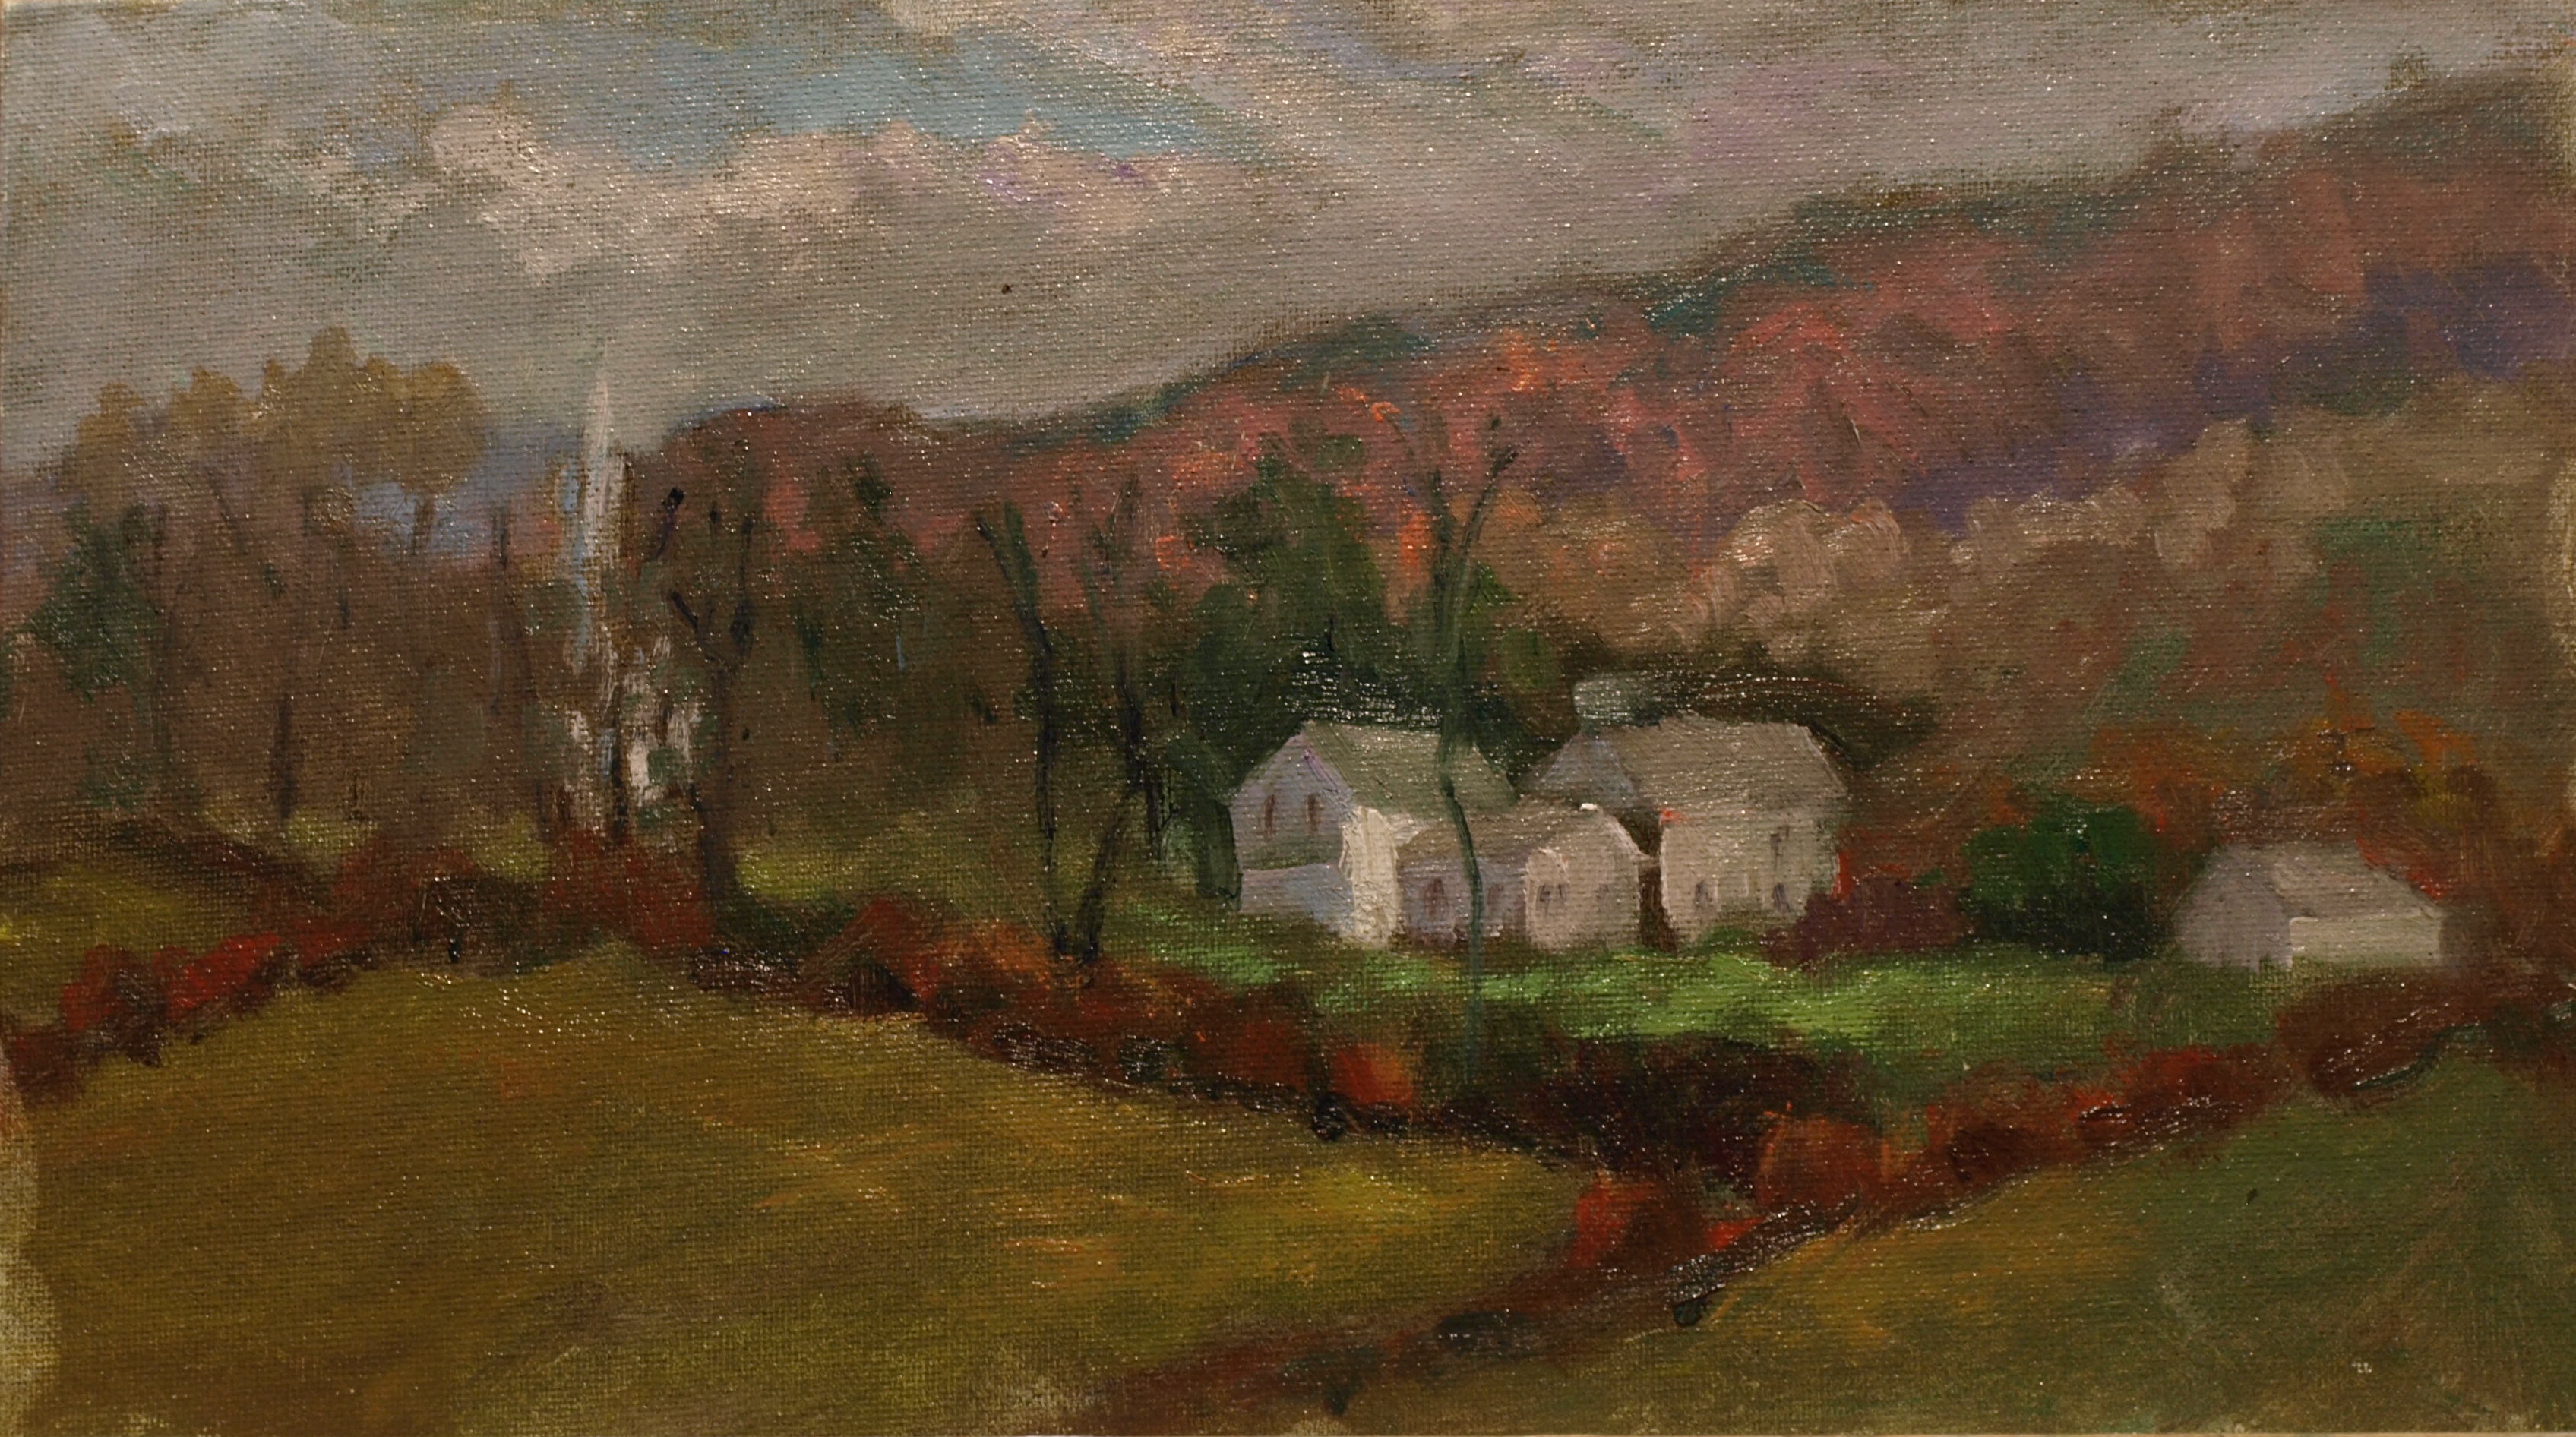 Village of Gaylordsville, Oil on Canvas on Panel, 8 x 14 Inches, by Richard Stalter, $220